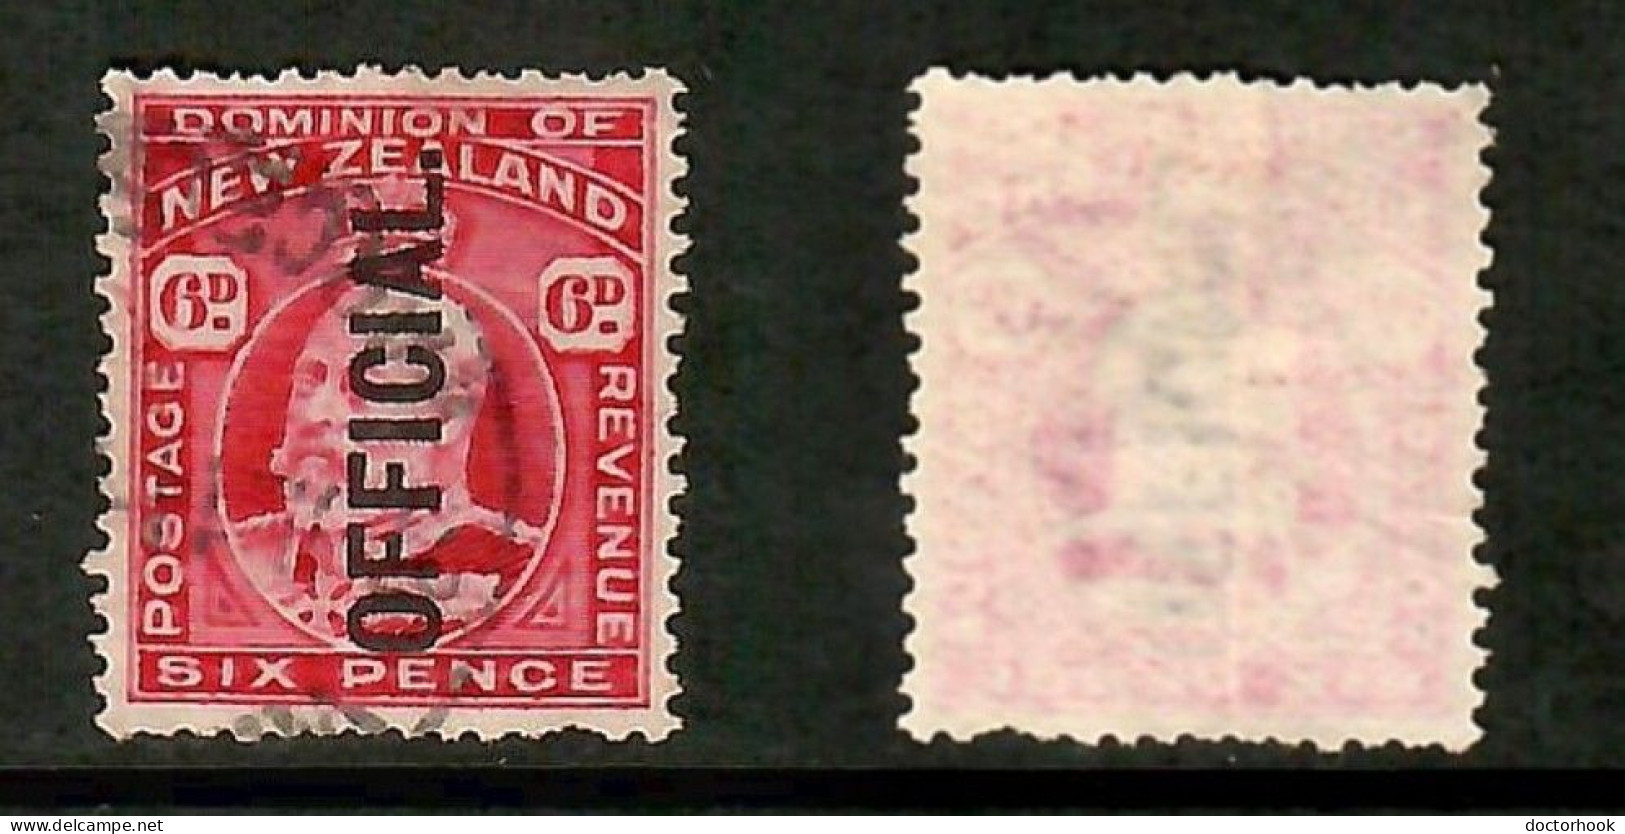 NEW ZEALAND    Scott # O 36 USED (CONDITION PER SCAN) (Stamp Scan # 1042-6) - Officials